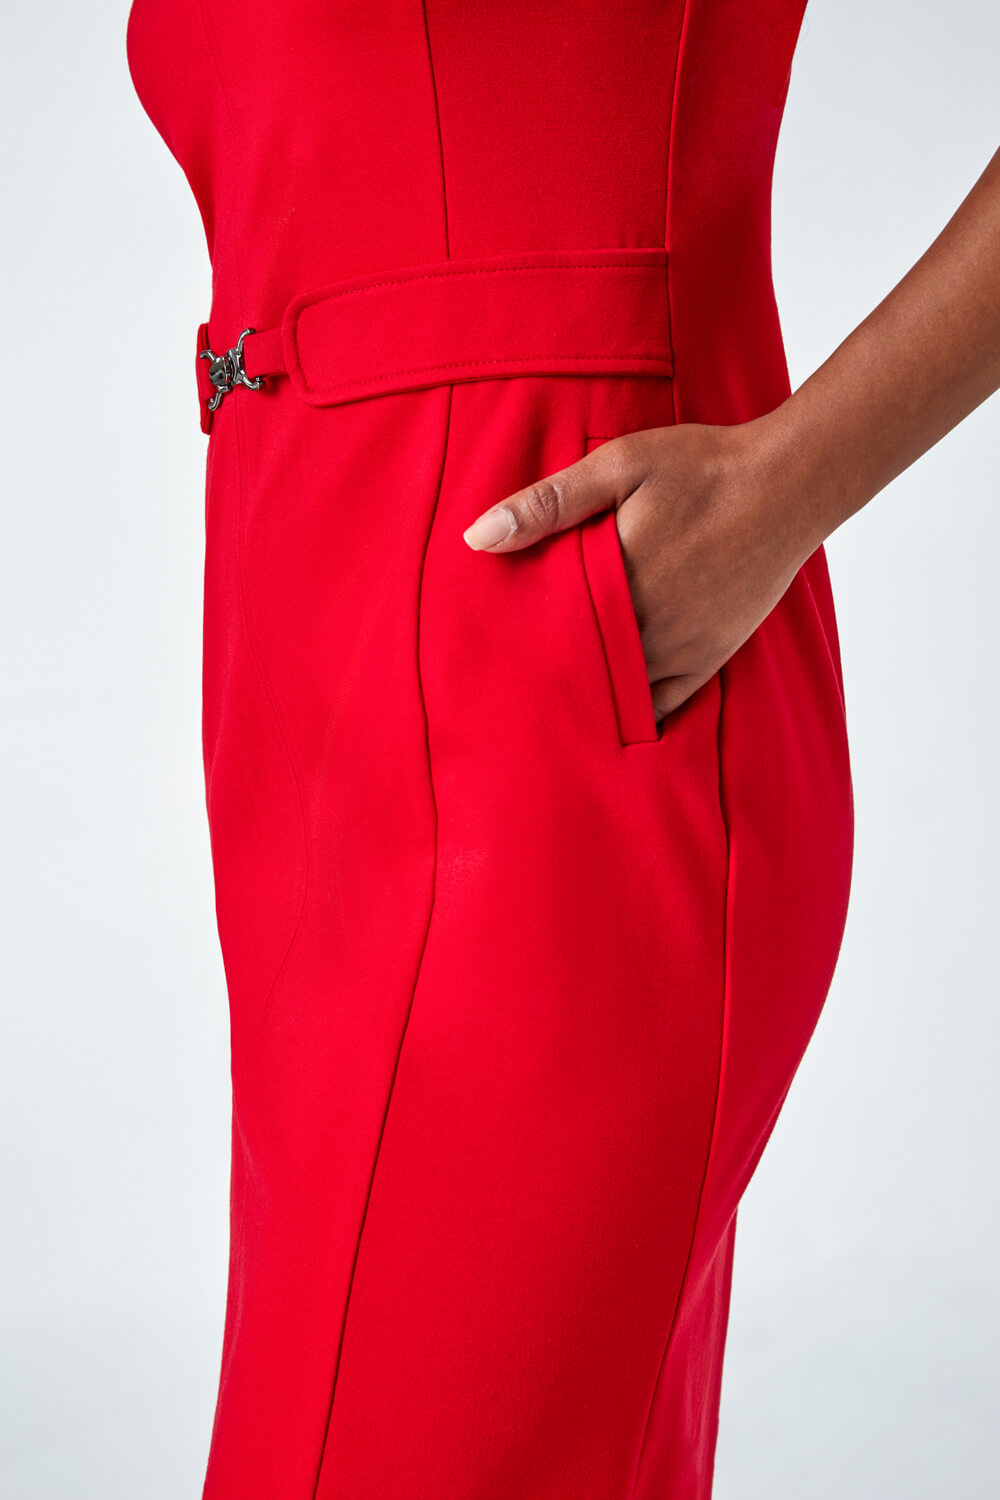 Red Petite Belted Shift Stretch Dress, Image 5 of 5